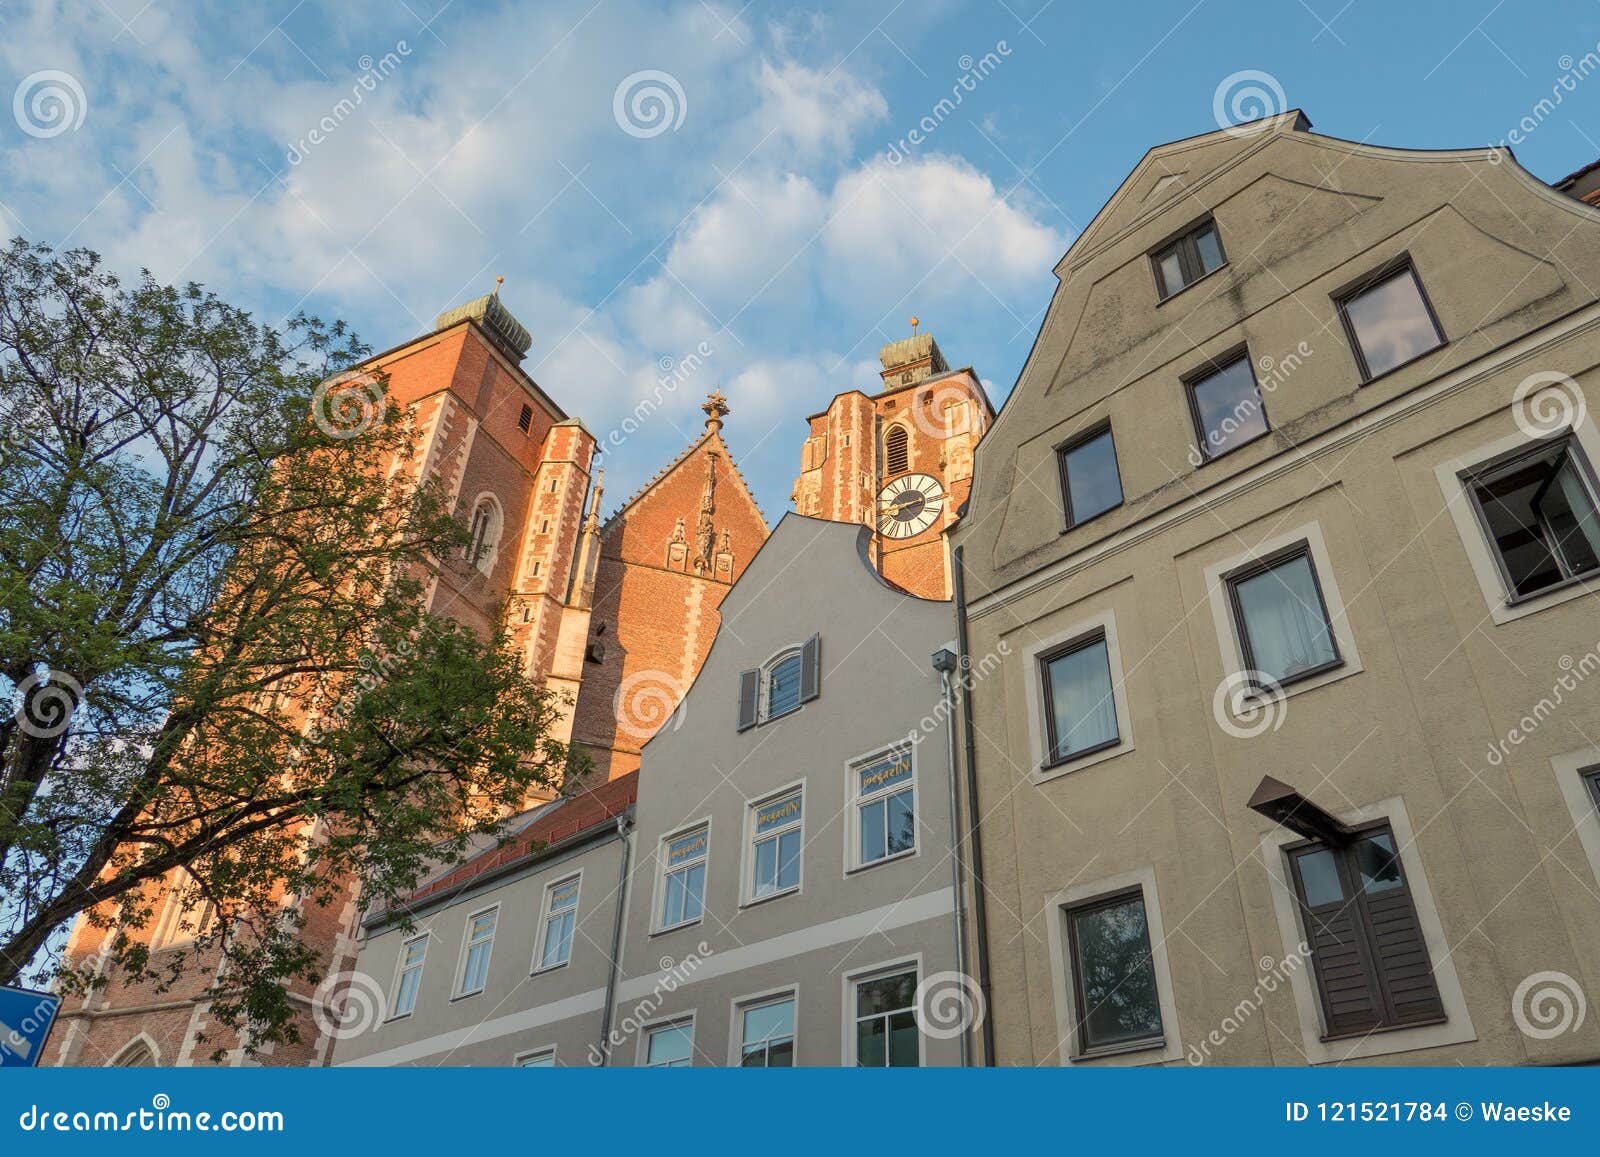 The City Of Ingolstadt In Germany Stock Photo Image Of Tower Shore 121521784